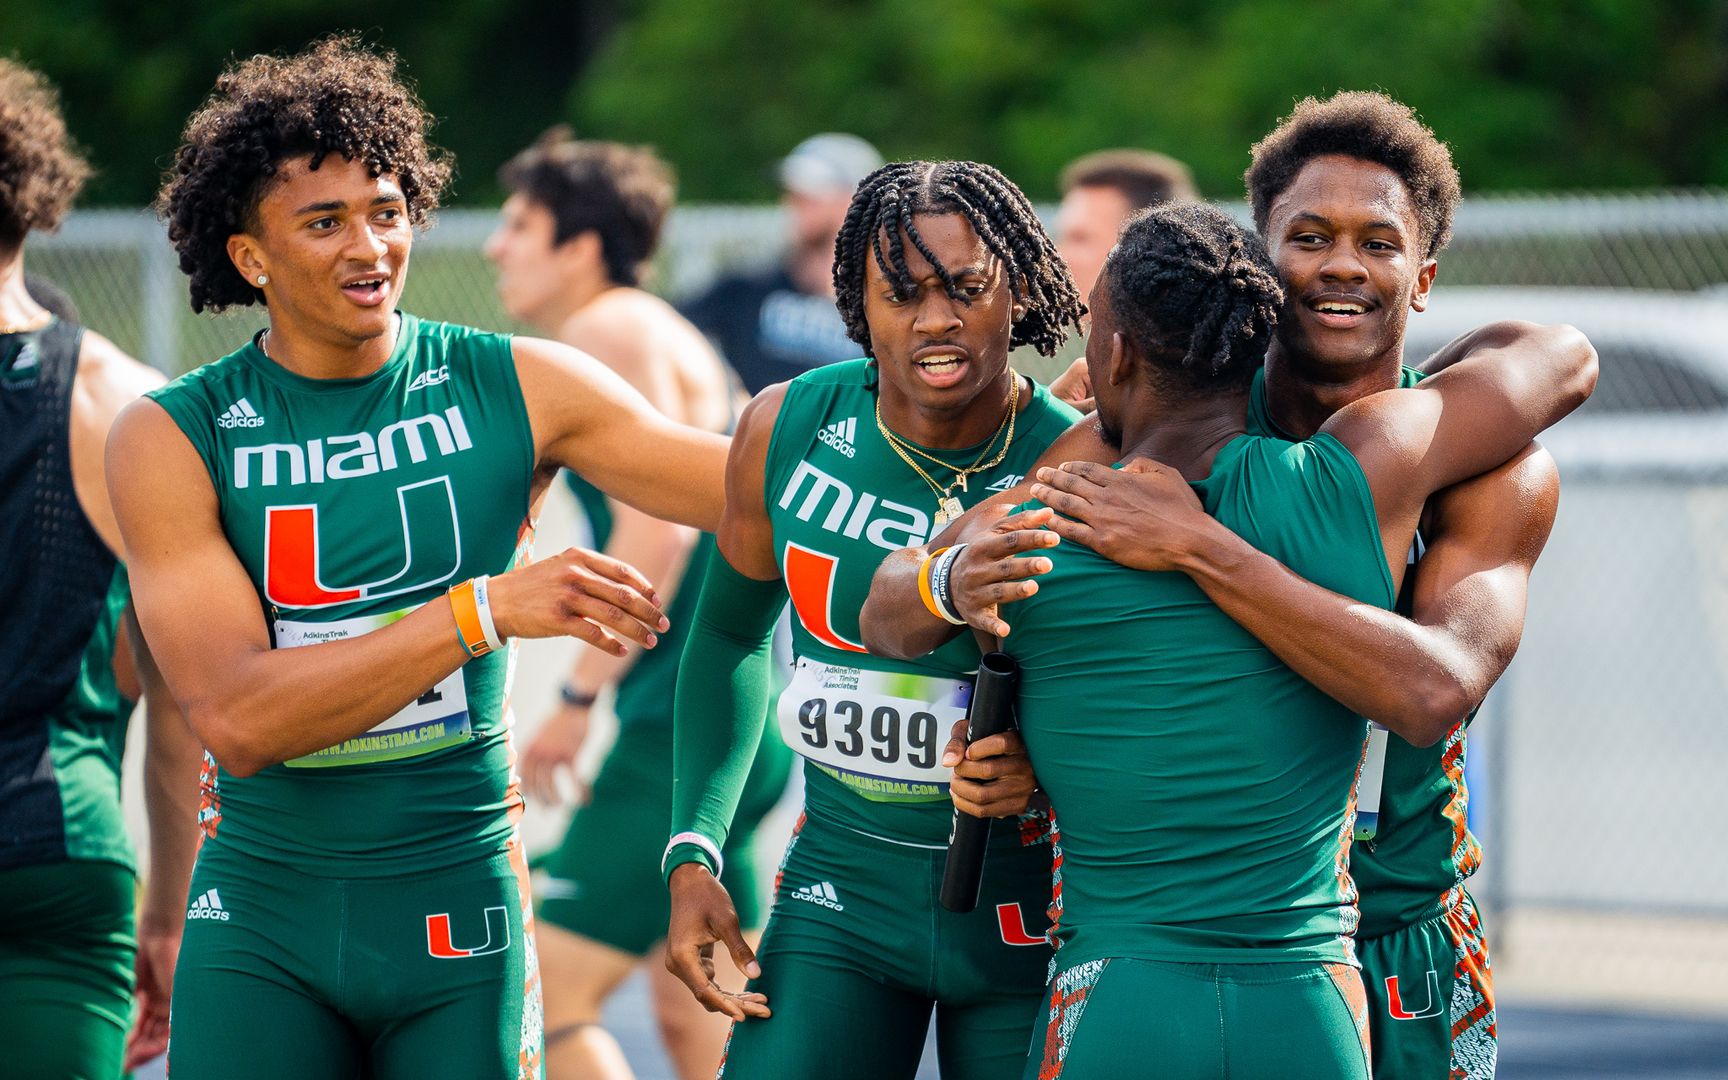 Miami’s 4x400 Relay Record Shattered on Final Day of East Coast Relays